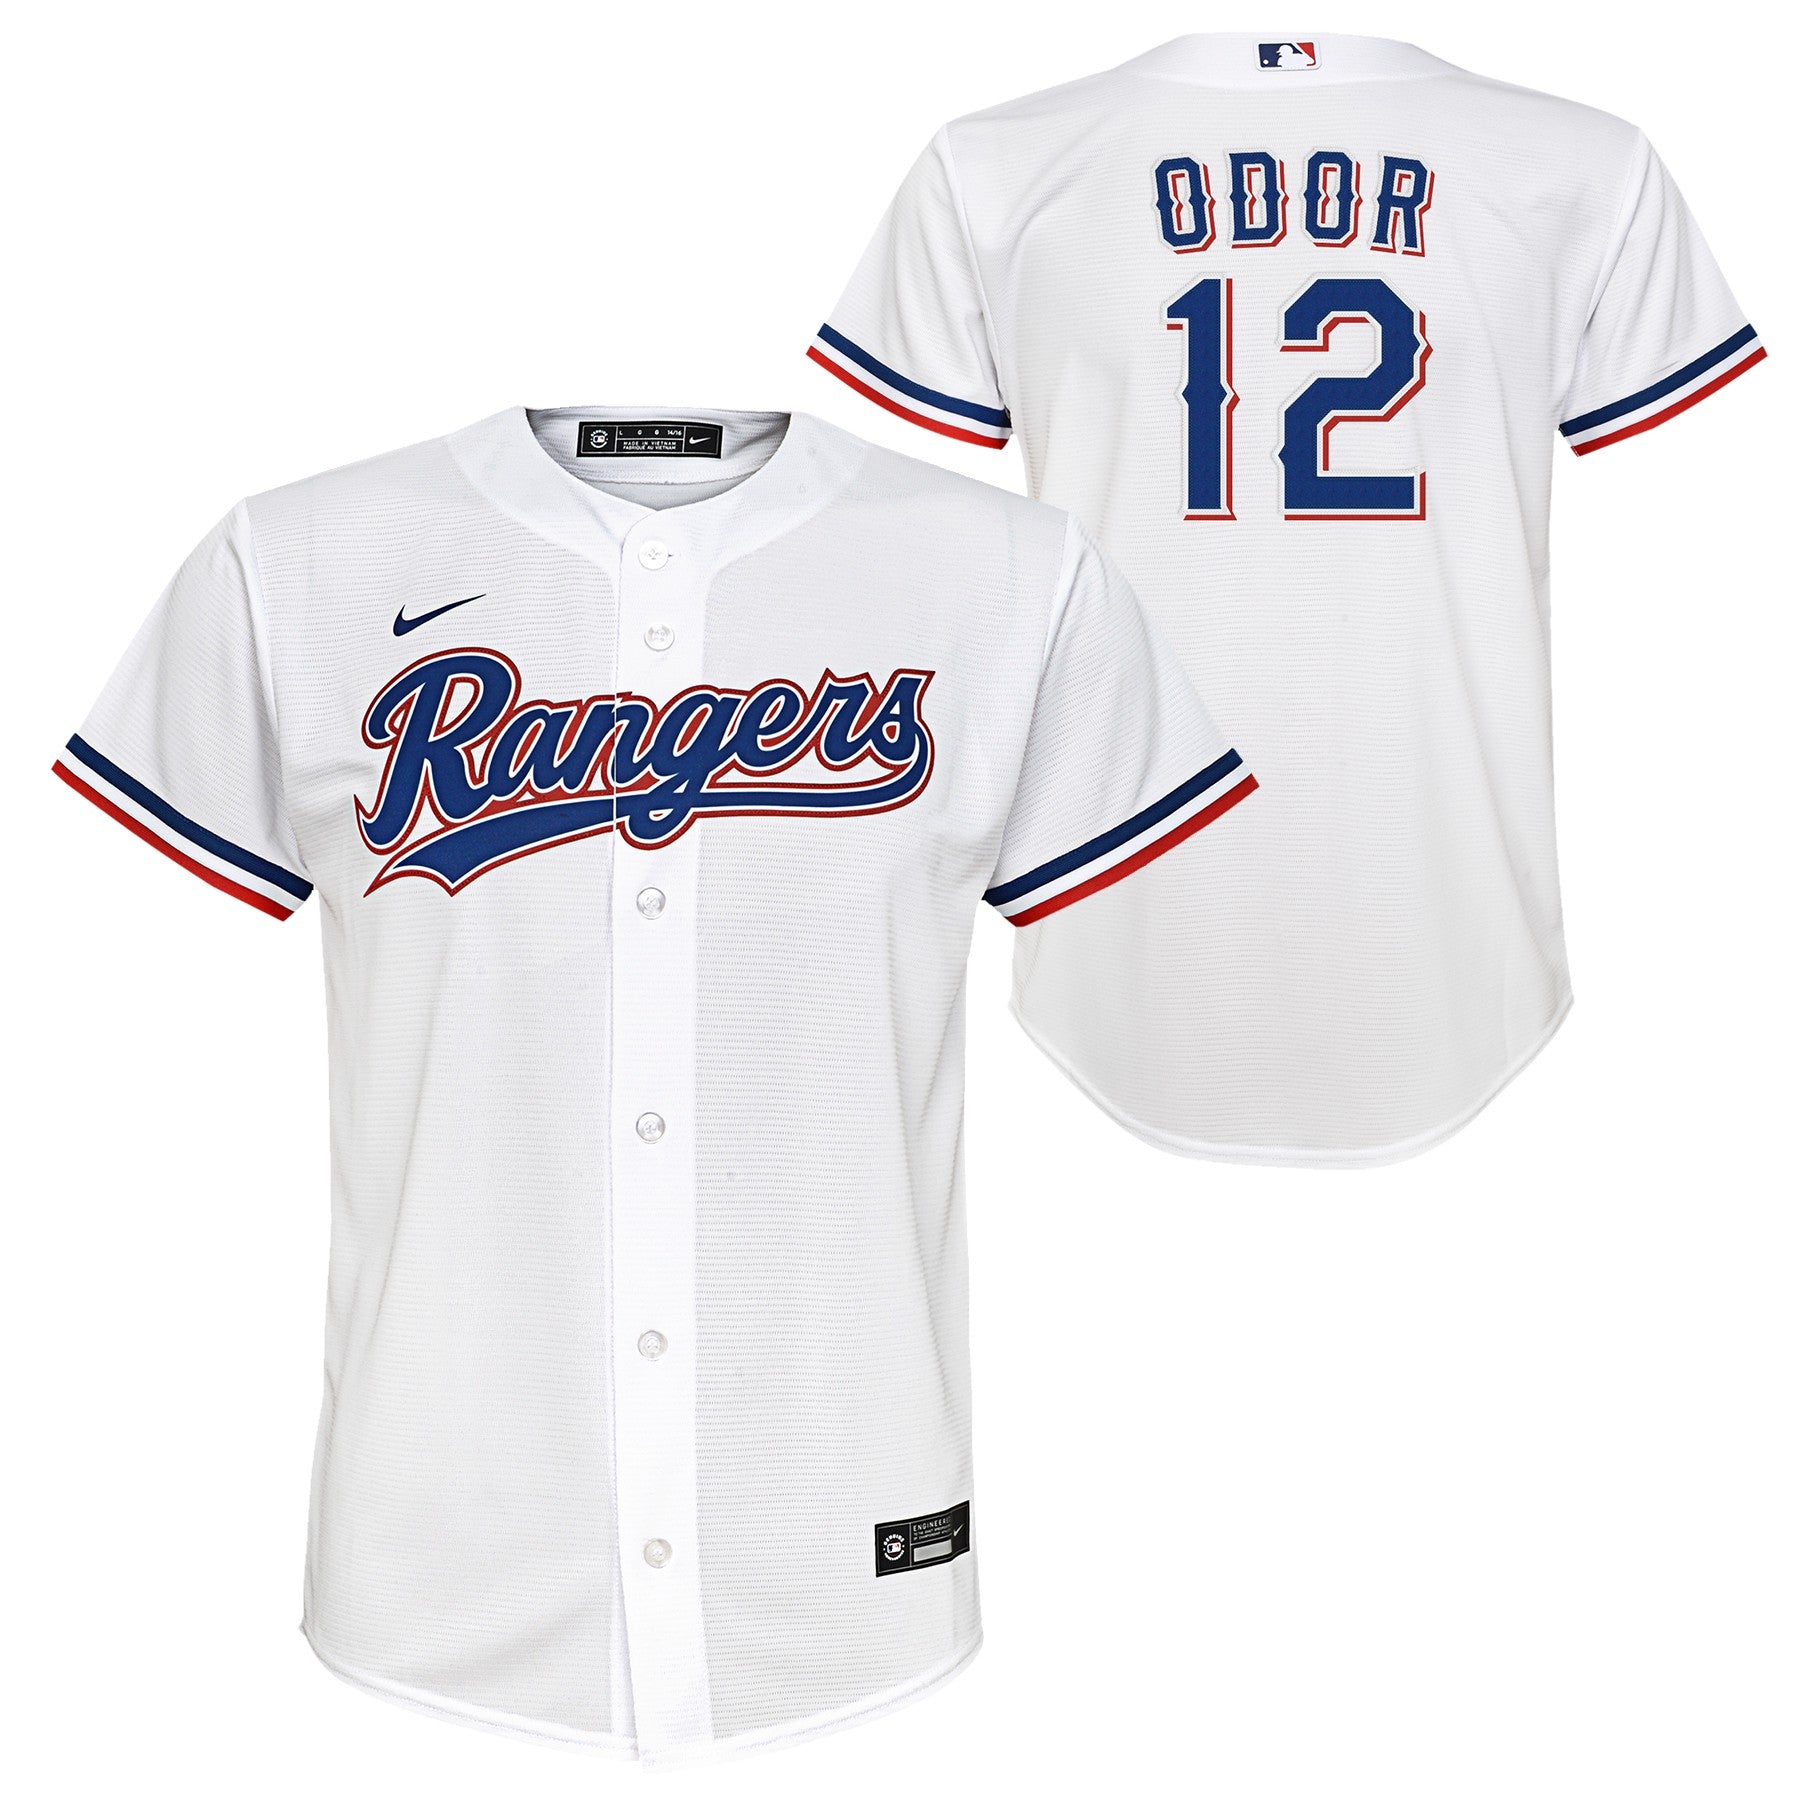 Nike Youth Texas Rangers Official Player Jersey - Rougned Odor - White